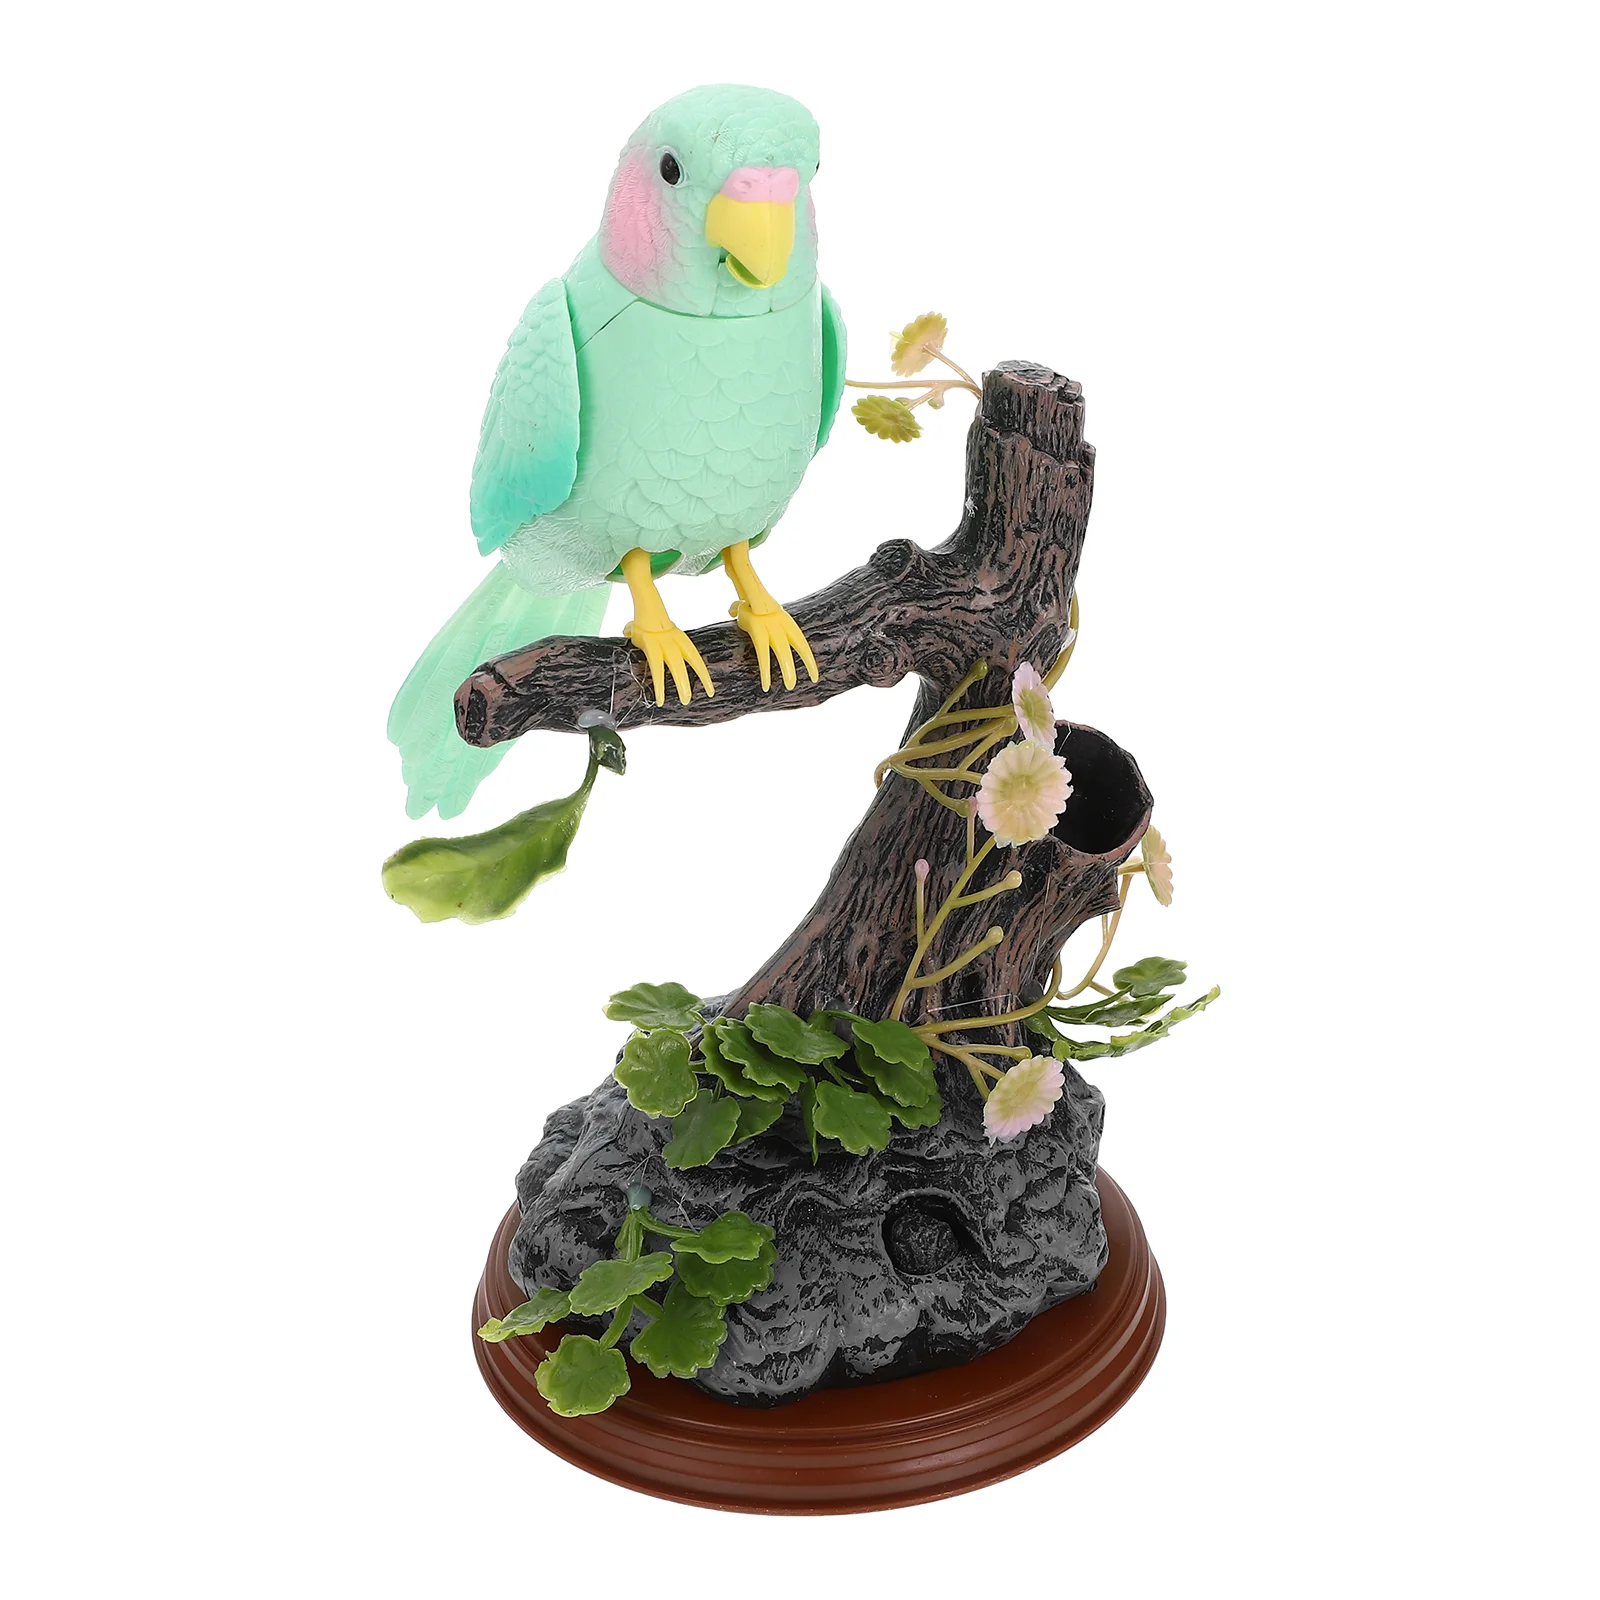 

Parrotrecording Talking Electronic Bird Animal Repeating Record Pet Electric Speaking Parrots Birds Repeat Figurine Model Statue